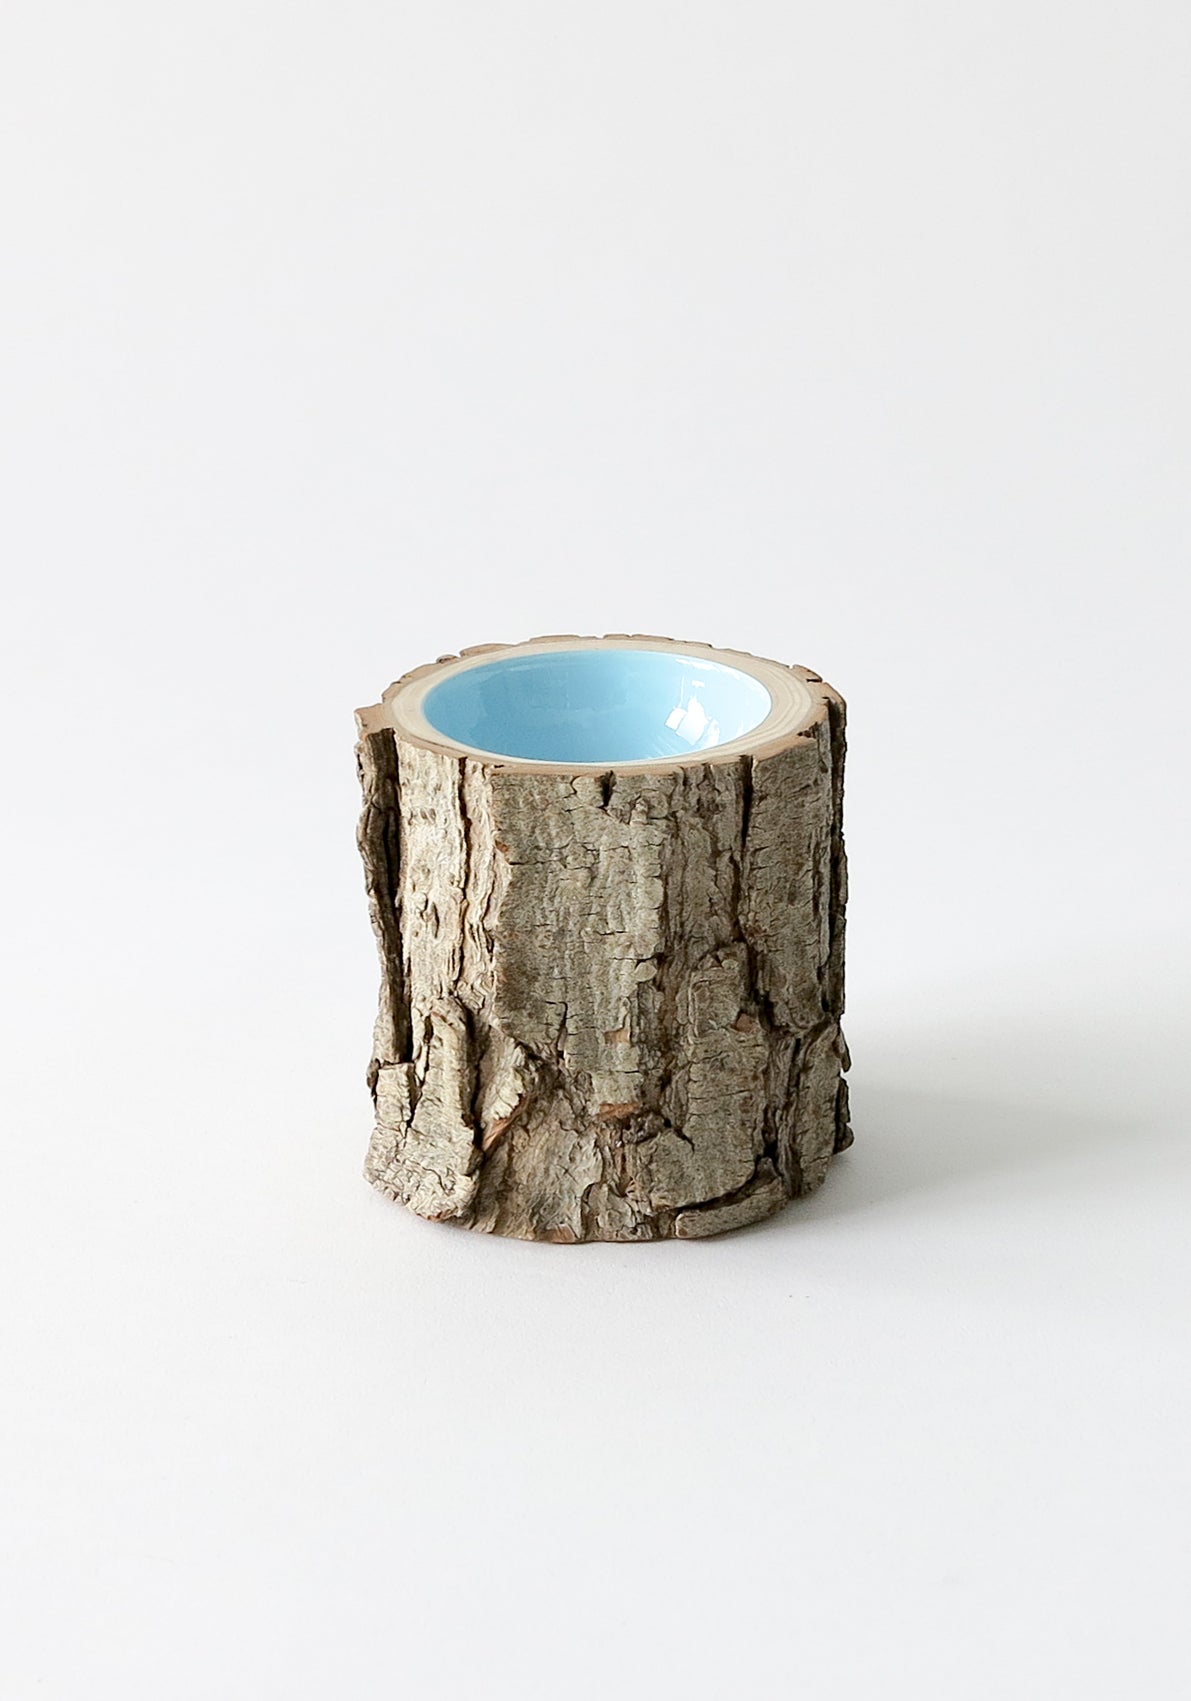 Size 3 Log Bowl - small wooden bowl with rough bark, glossy interior is a sky blue colour.